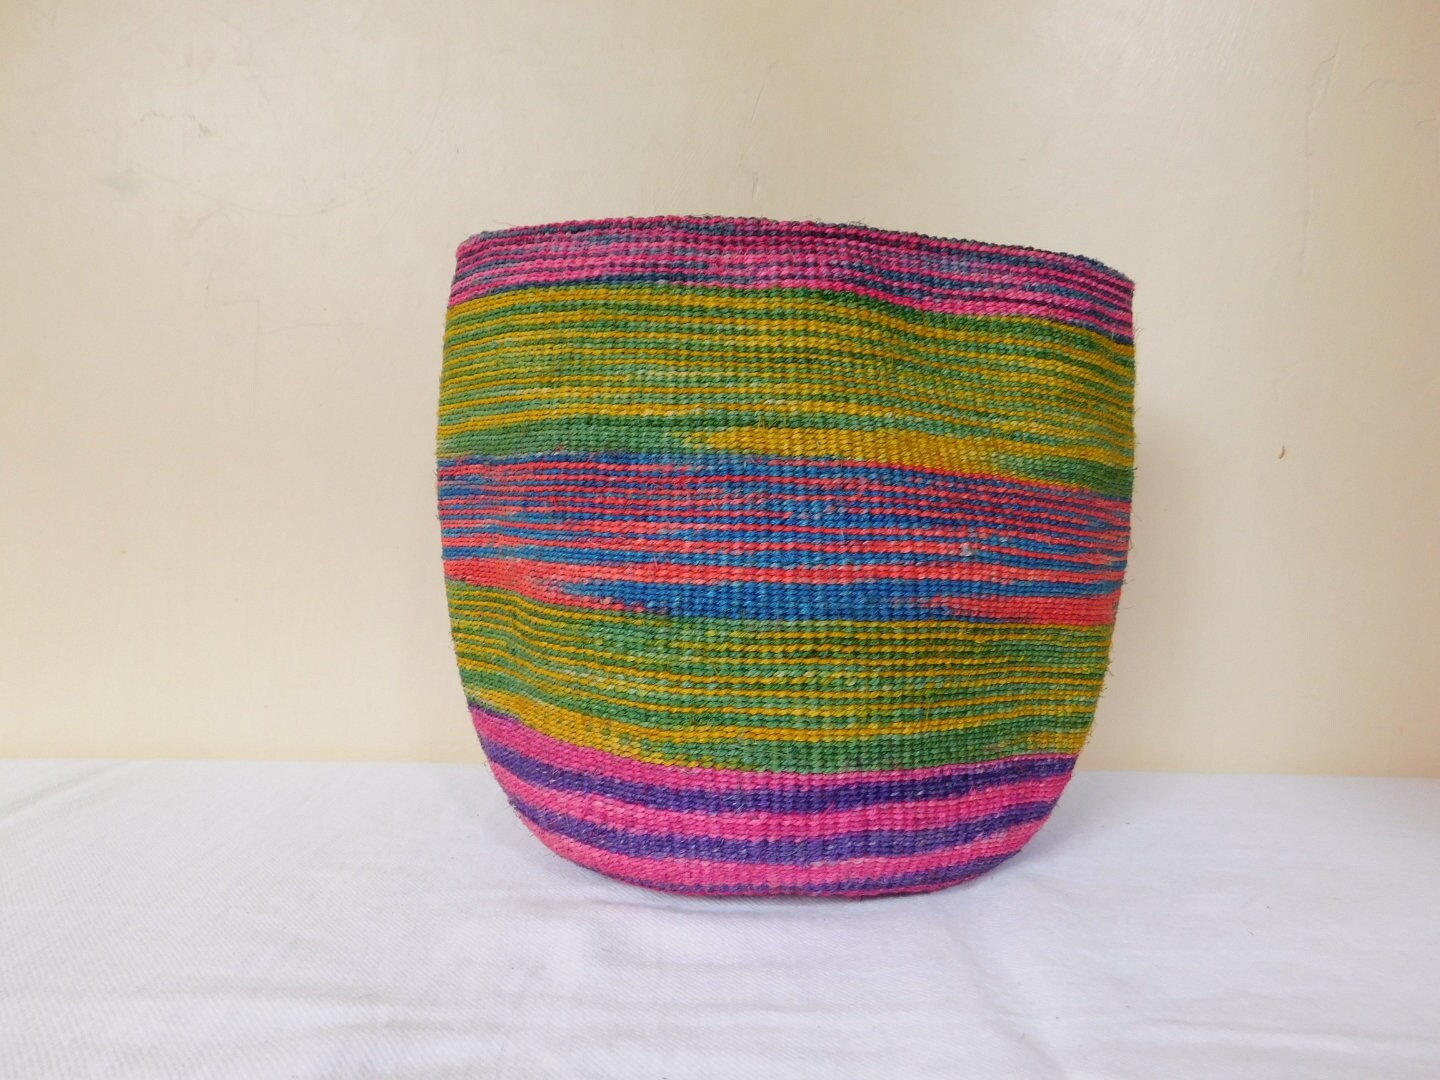 Handwoven Colorful Tapered Planter Basket